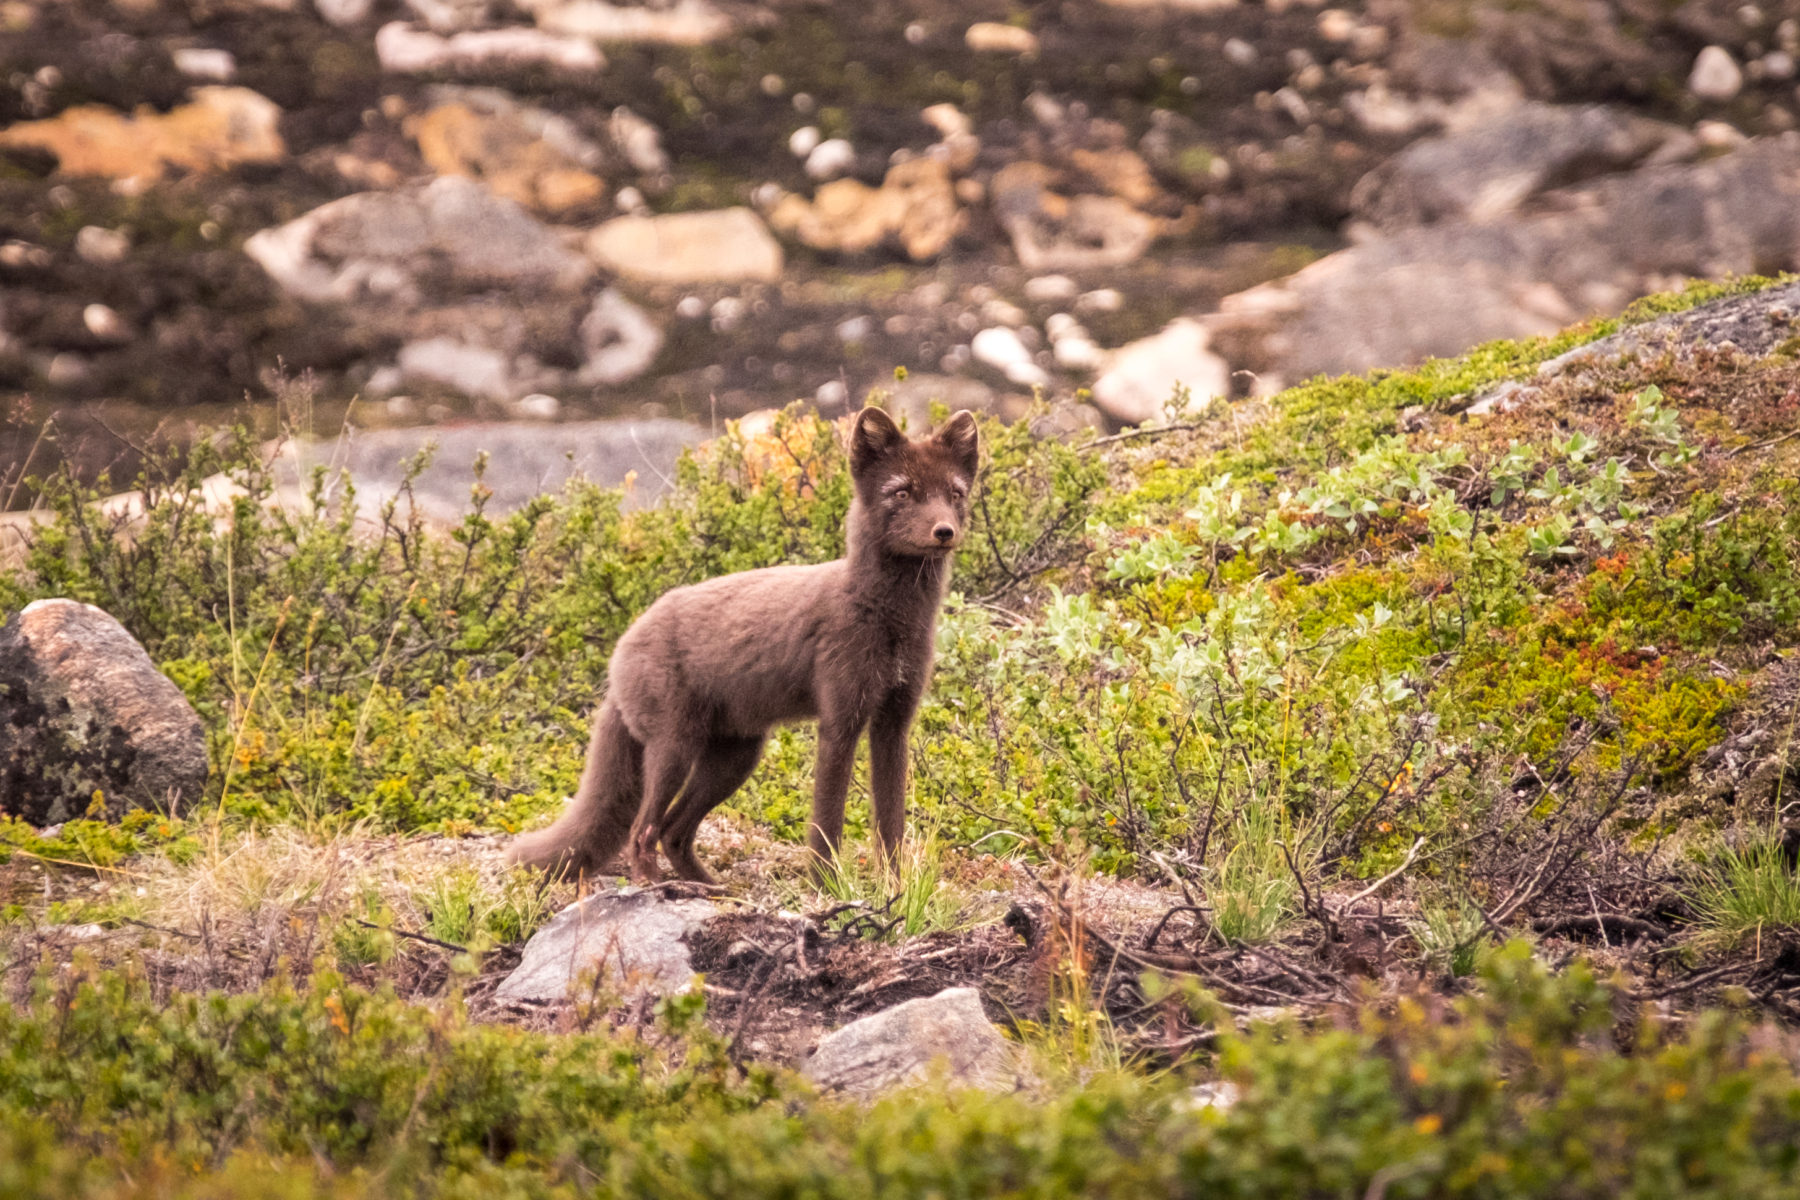 Arctic Foxes or Polar Foxes are one type of wildlife you can spot along the Arctic Circle Trail